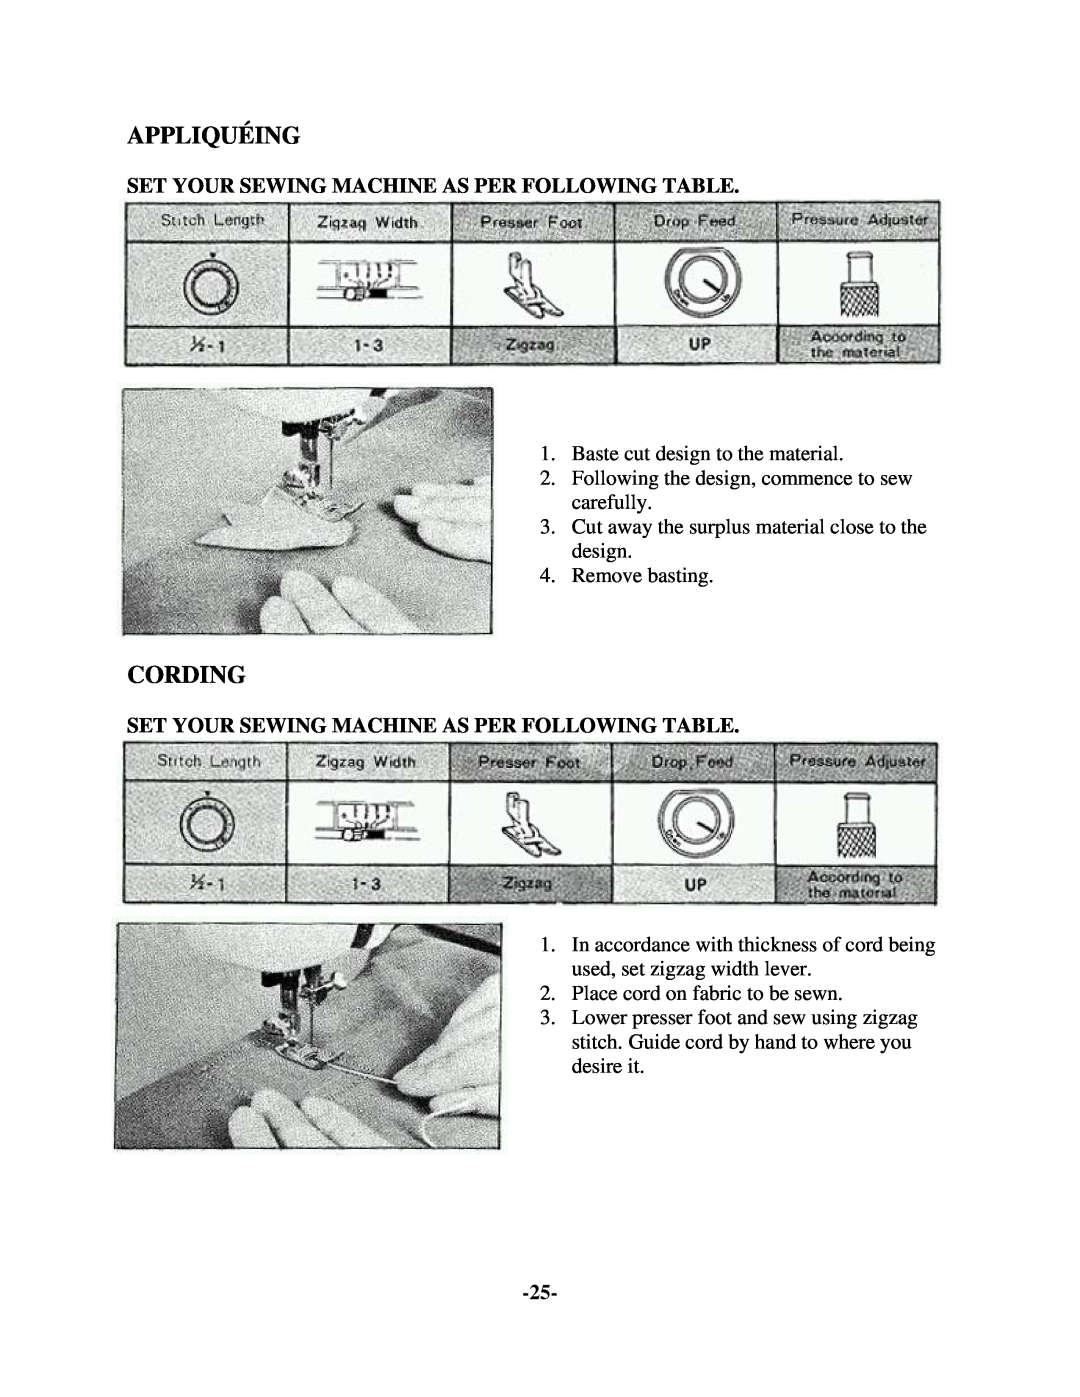 Brother 681B-UG manual Appliquéing, Cording, Set Your Sewing Machine As Per Following Table 